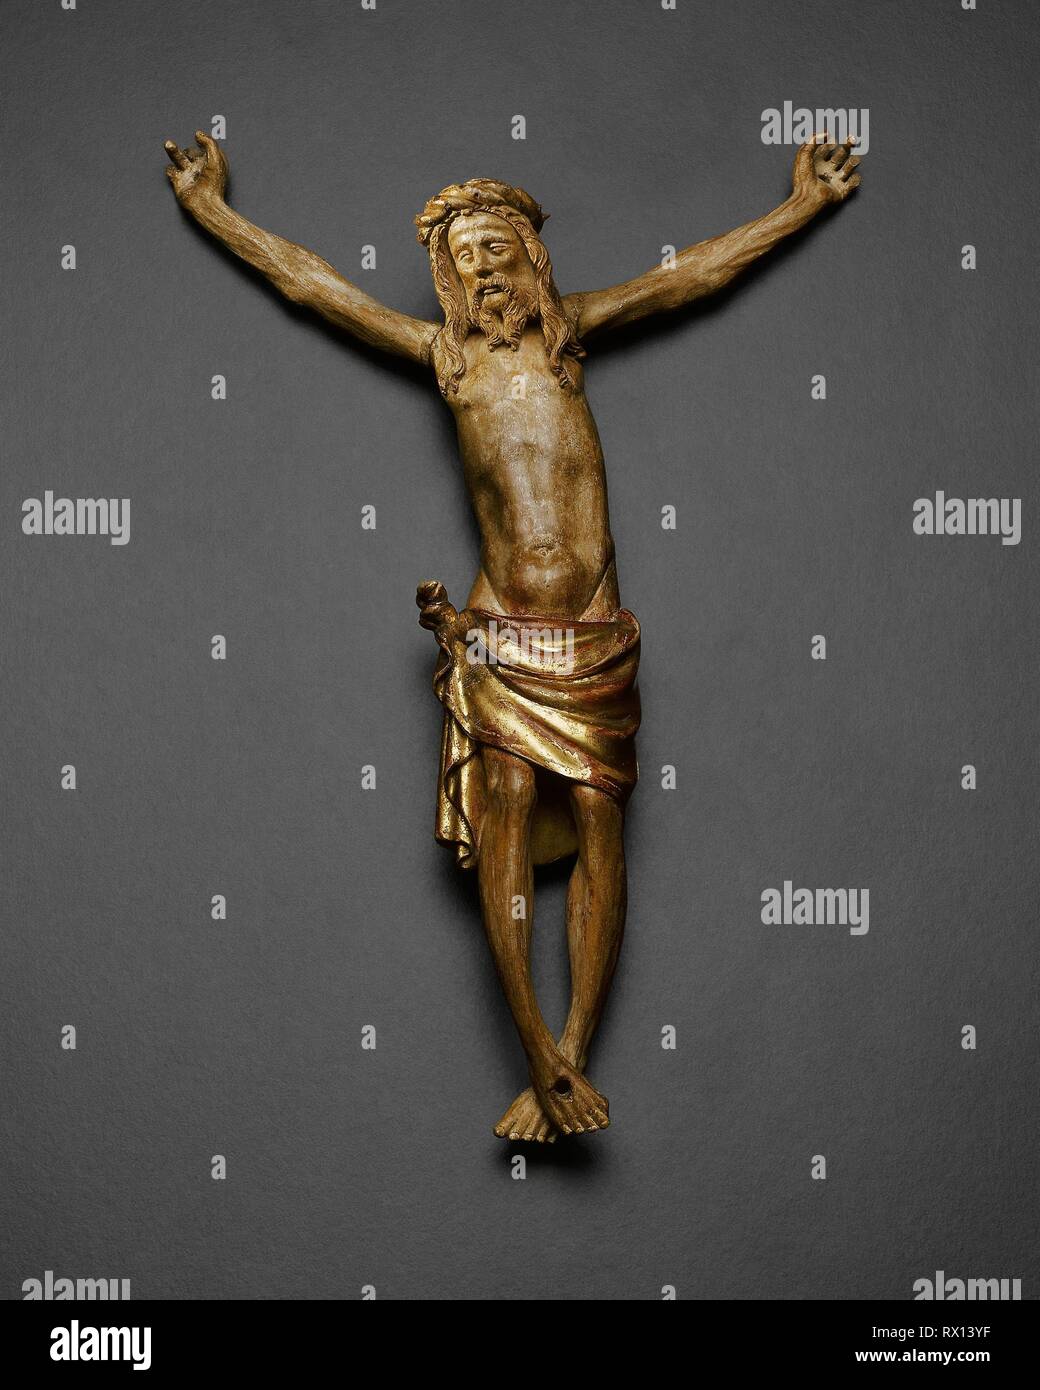 Corpus of Christ, from the Altarpiece of the Crucifixion. Jacques de Baerze; Netherlandish, active before 1384-1399; Melchior Broederlam; Netherlandish, about 1355-about 1411. Date: 1391-1399. Dimensions: 27.7 × 18.3 × 5.2 cm (11 × 6 1/4 × 2 1/16 in.). Walnut with gilding and traces of polychromy. Origin: Flanders. Museum: The Chicago Art Institute. Stock Photo